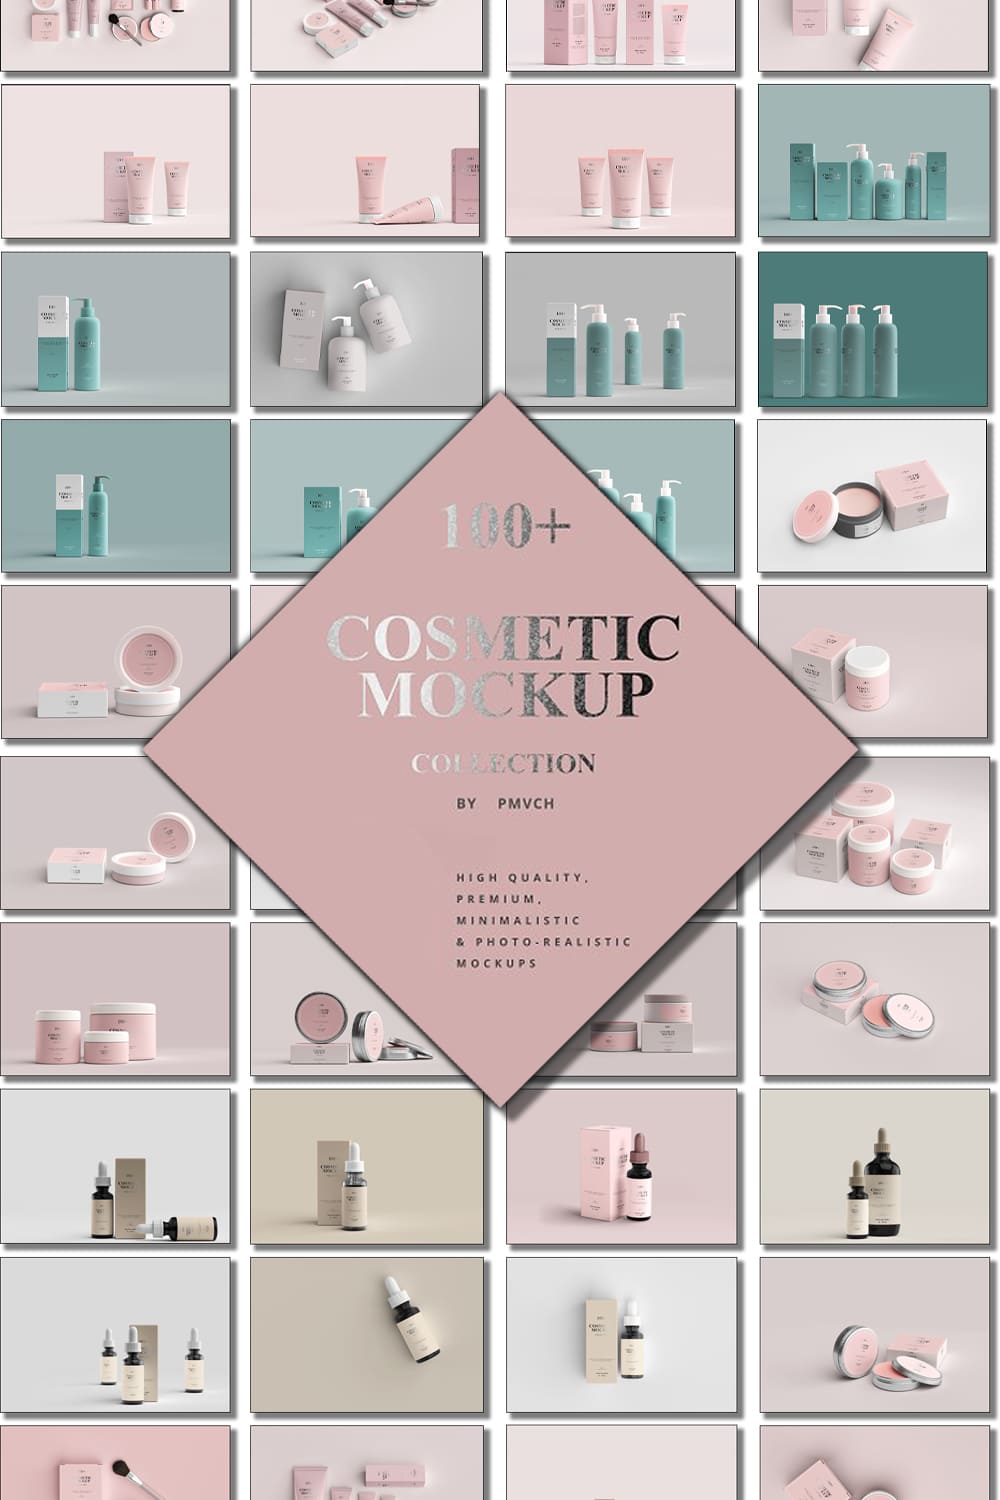 100+ Cosmetic Mock-up Collection - Pinterest.